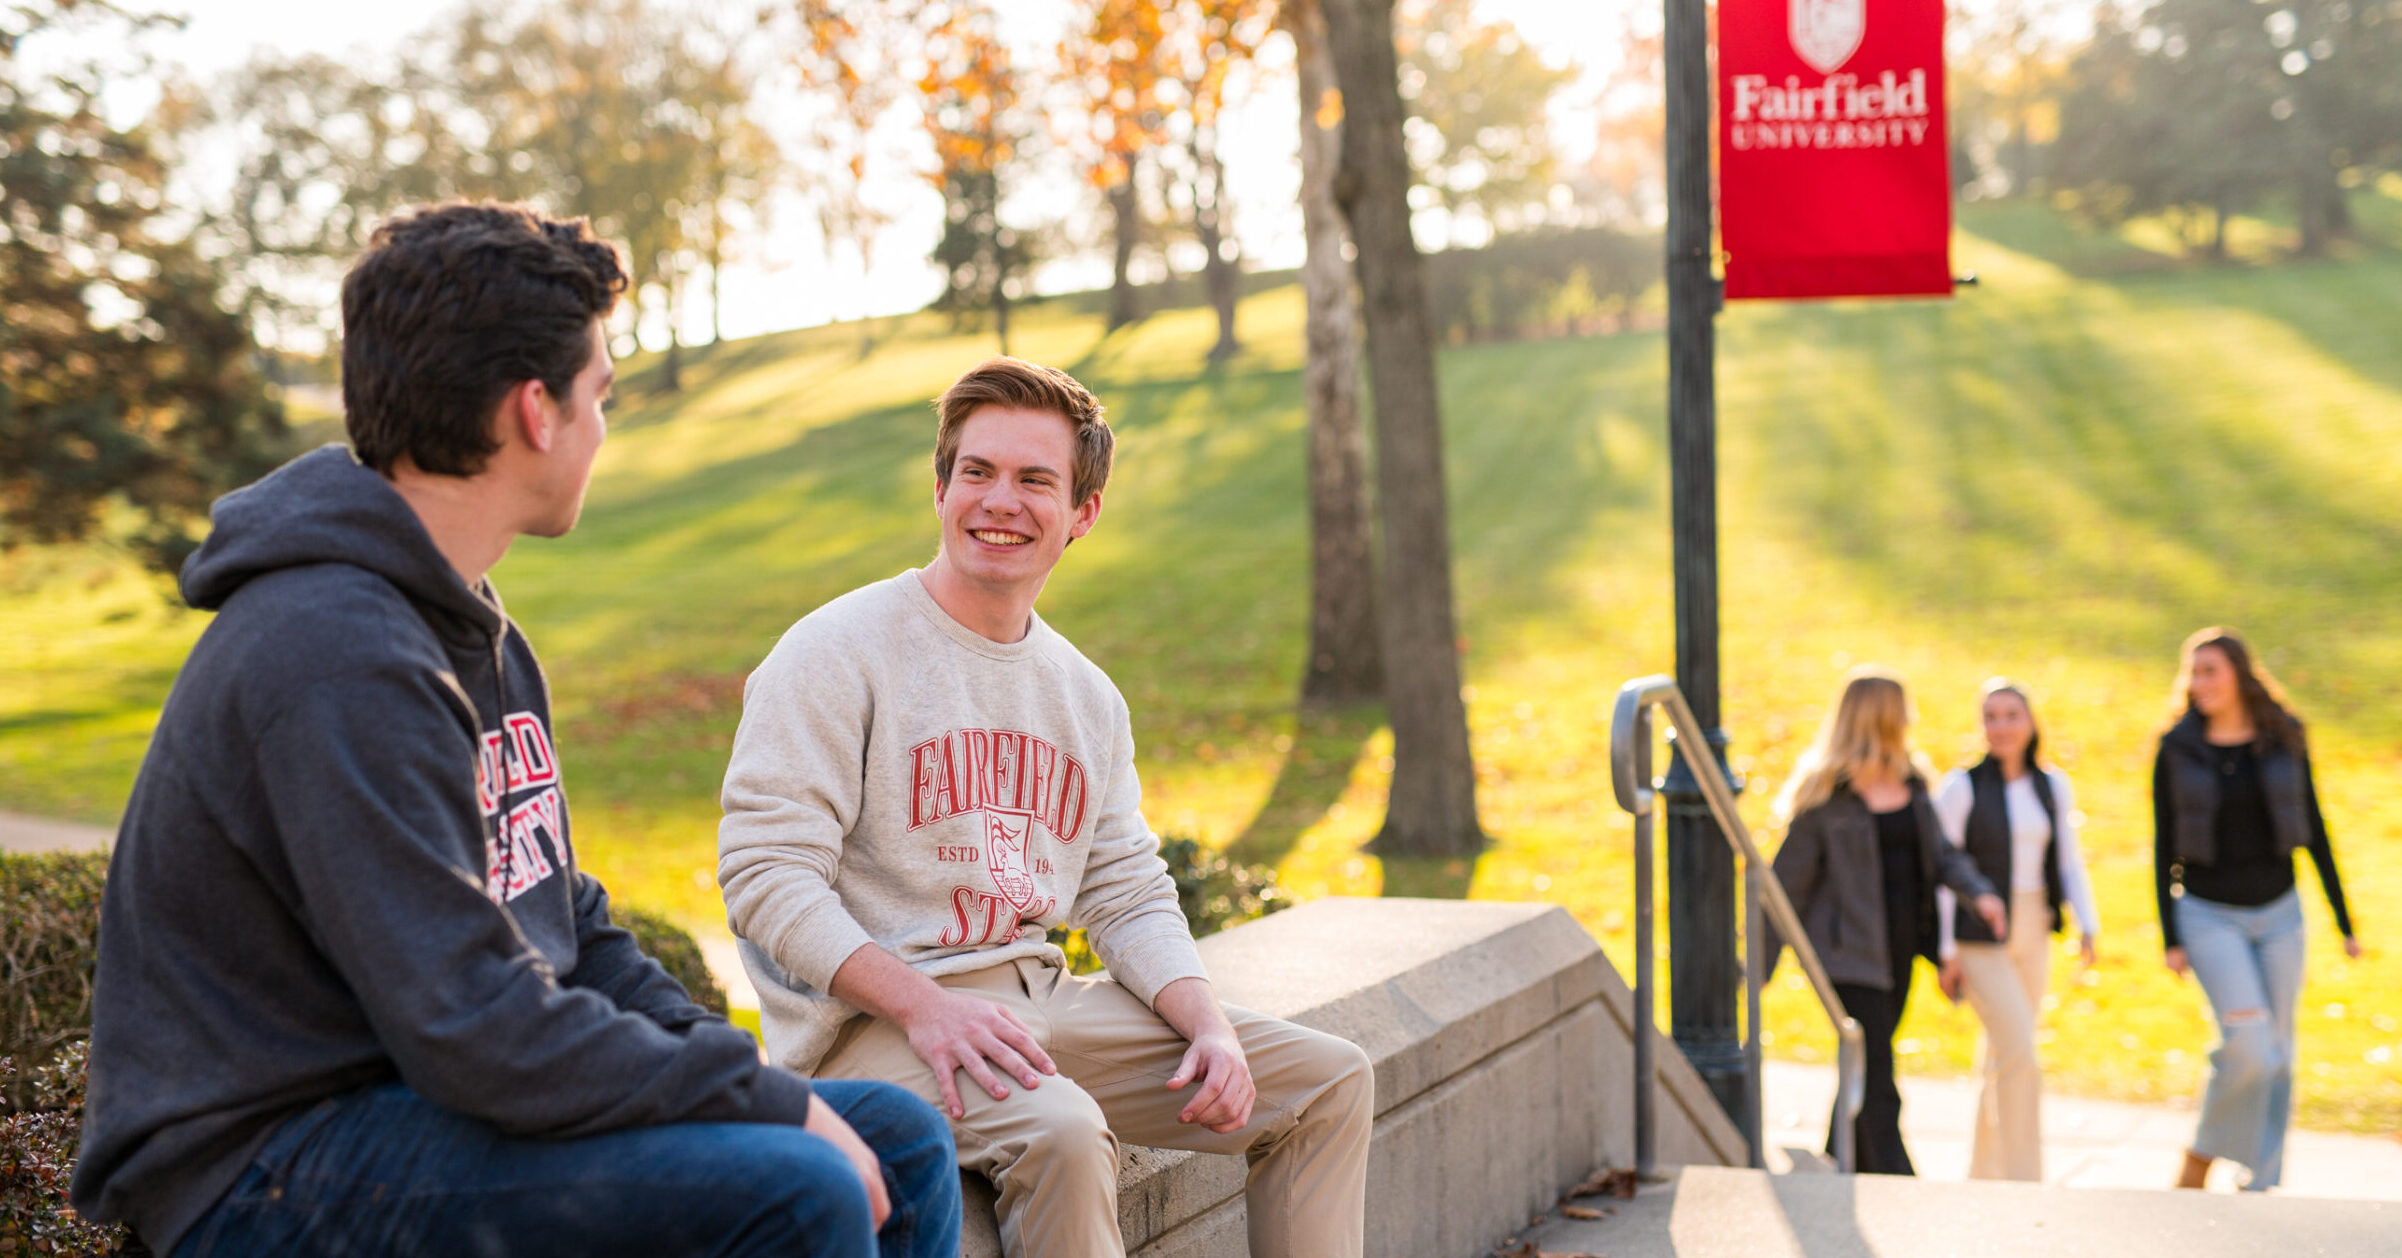 Featured image for “A Visit to Fairfield University”